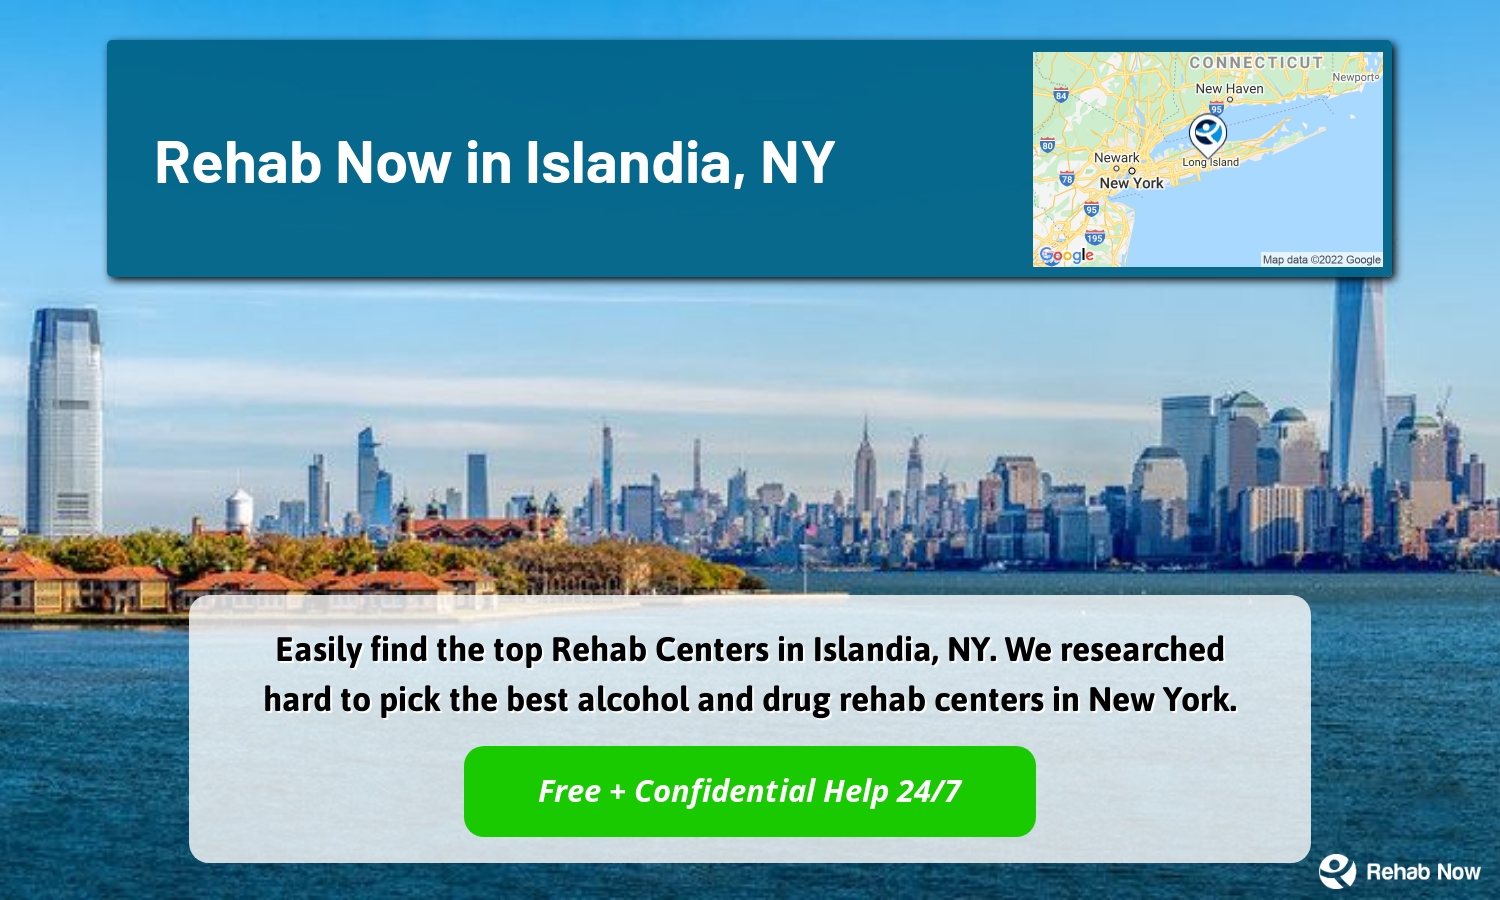 Easily find the top Rehab Centers in Islandia, NY. We researched hard to pick the best alcohol and drug rehab centers in New York.